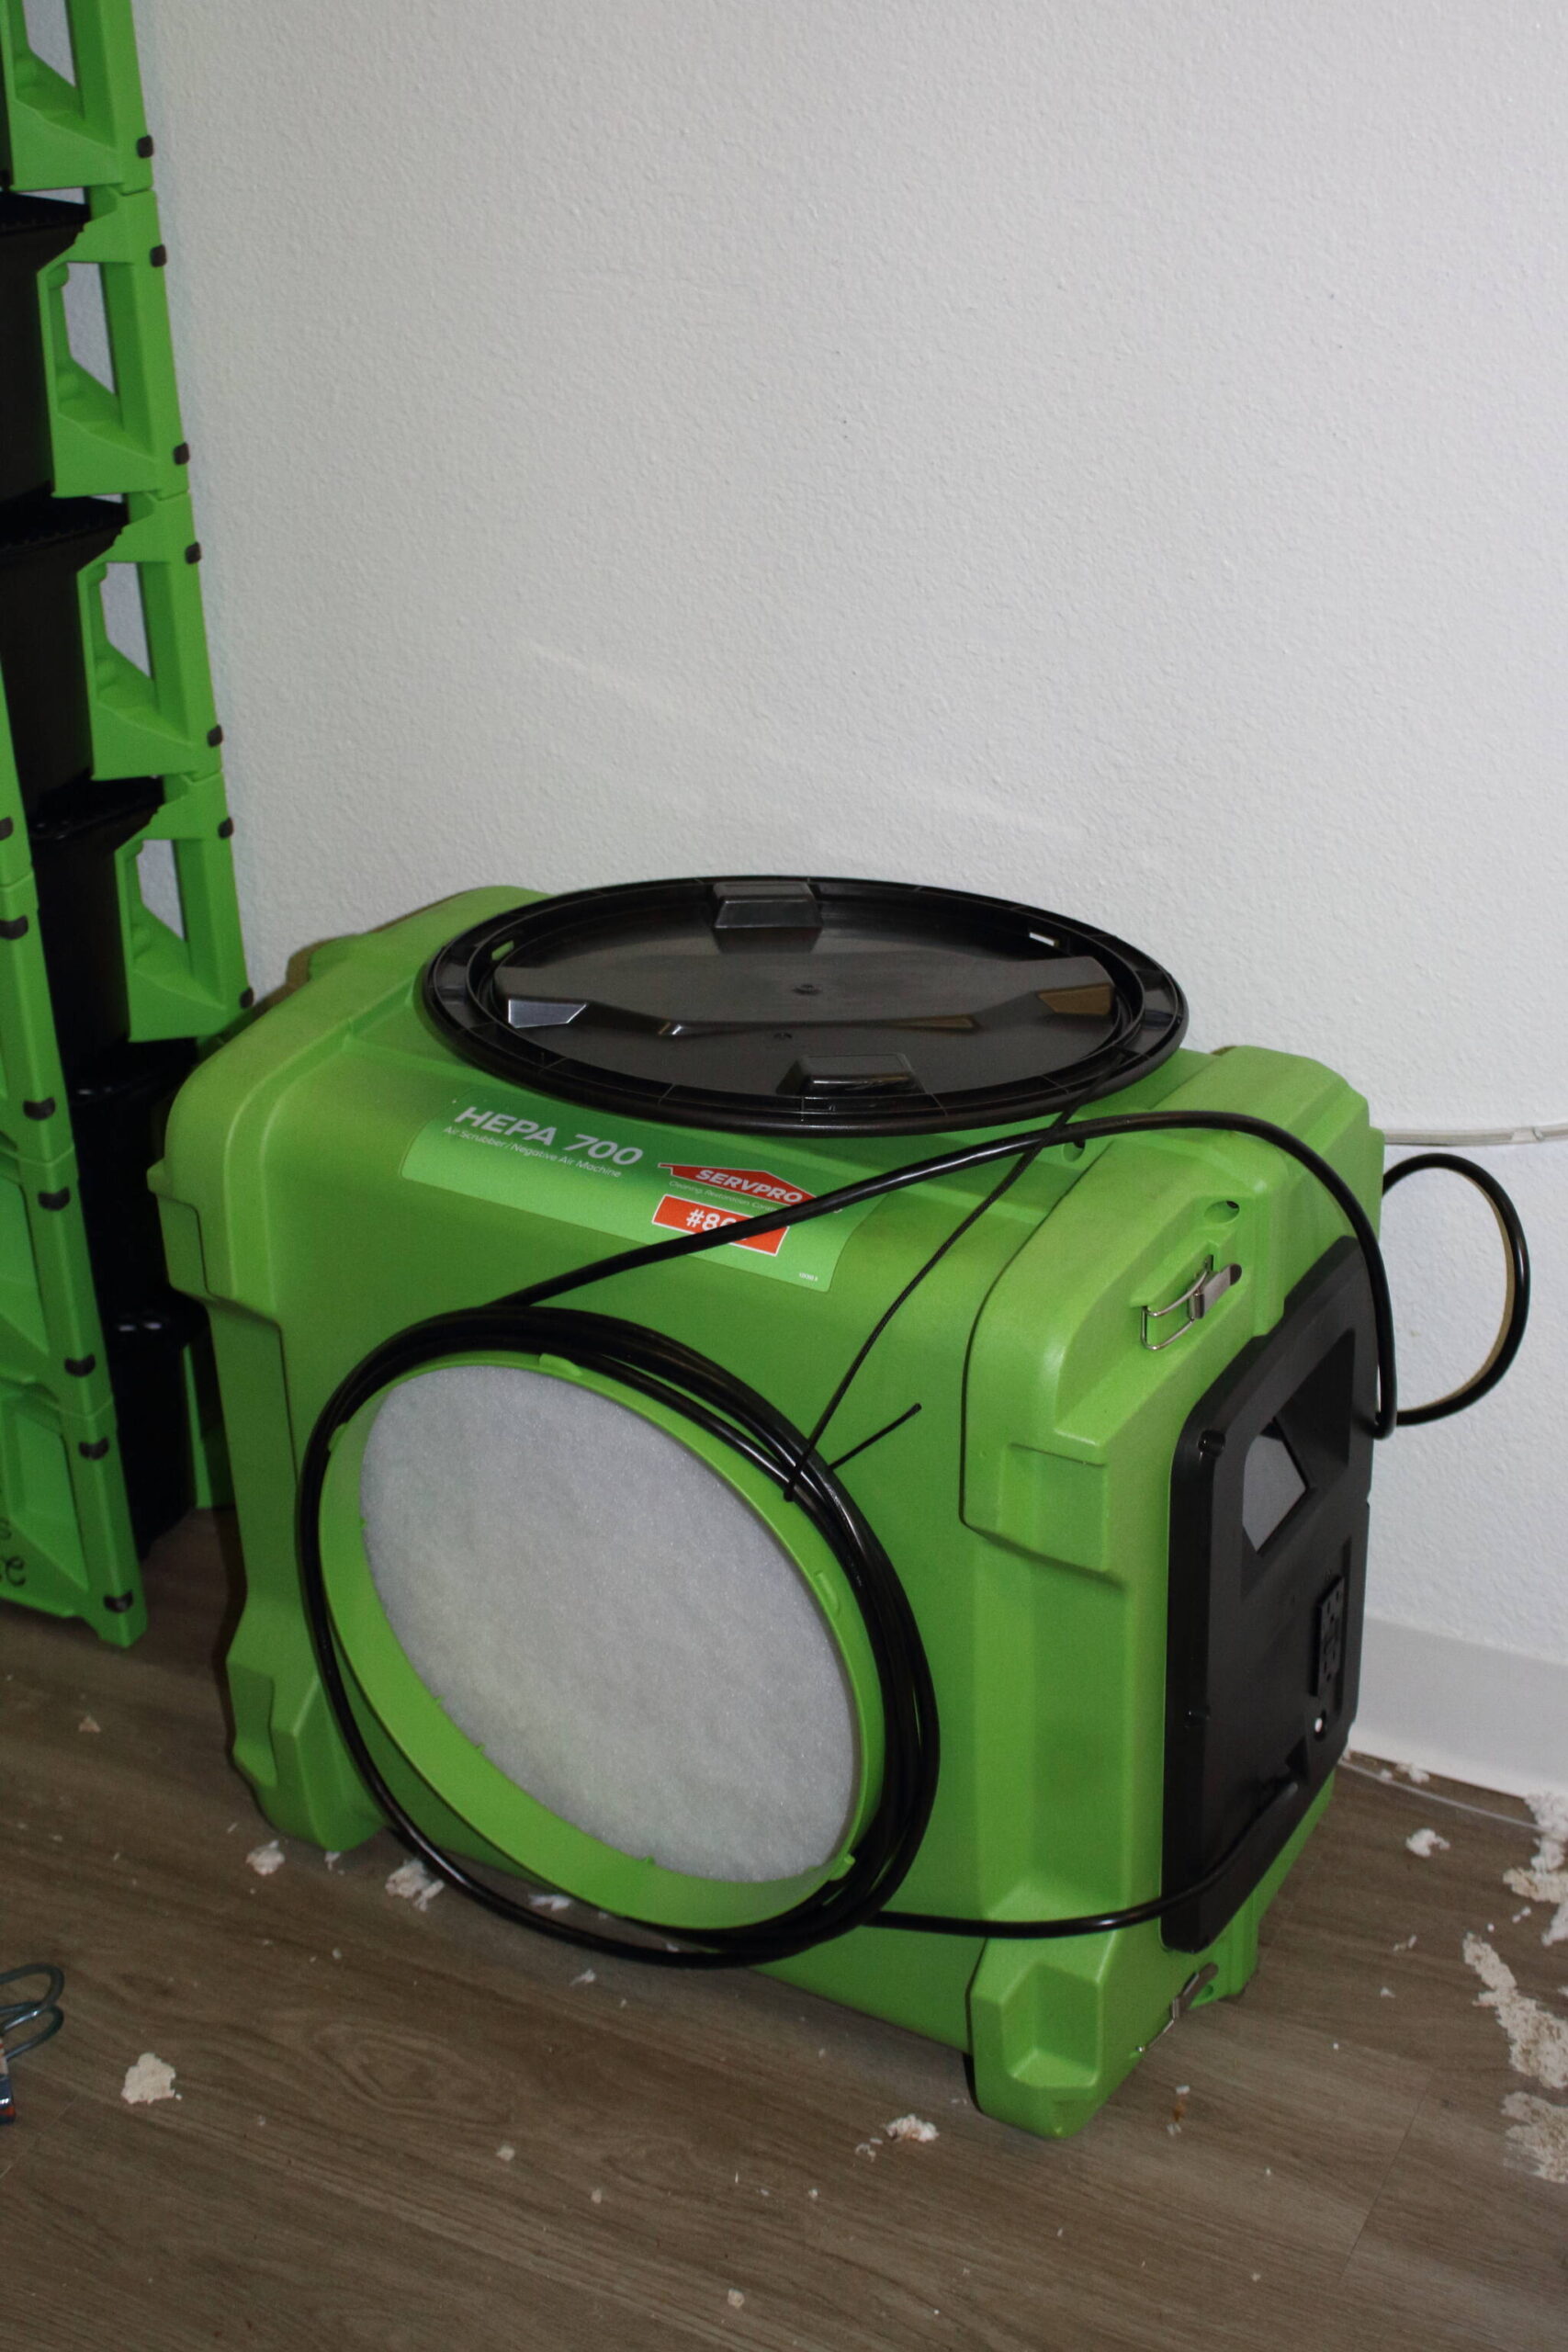 This dehumidifier was provided by the Miro Apartments for a tenant to dry the space before repairs can begin. Photo by Keelin Everly-Lang / The Mirror